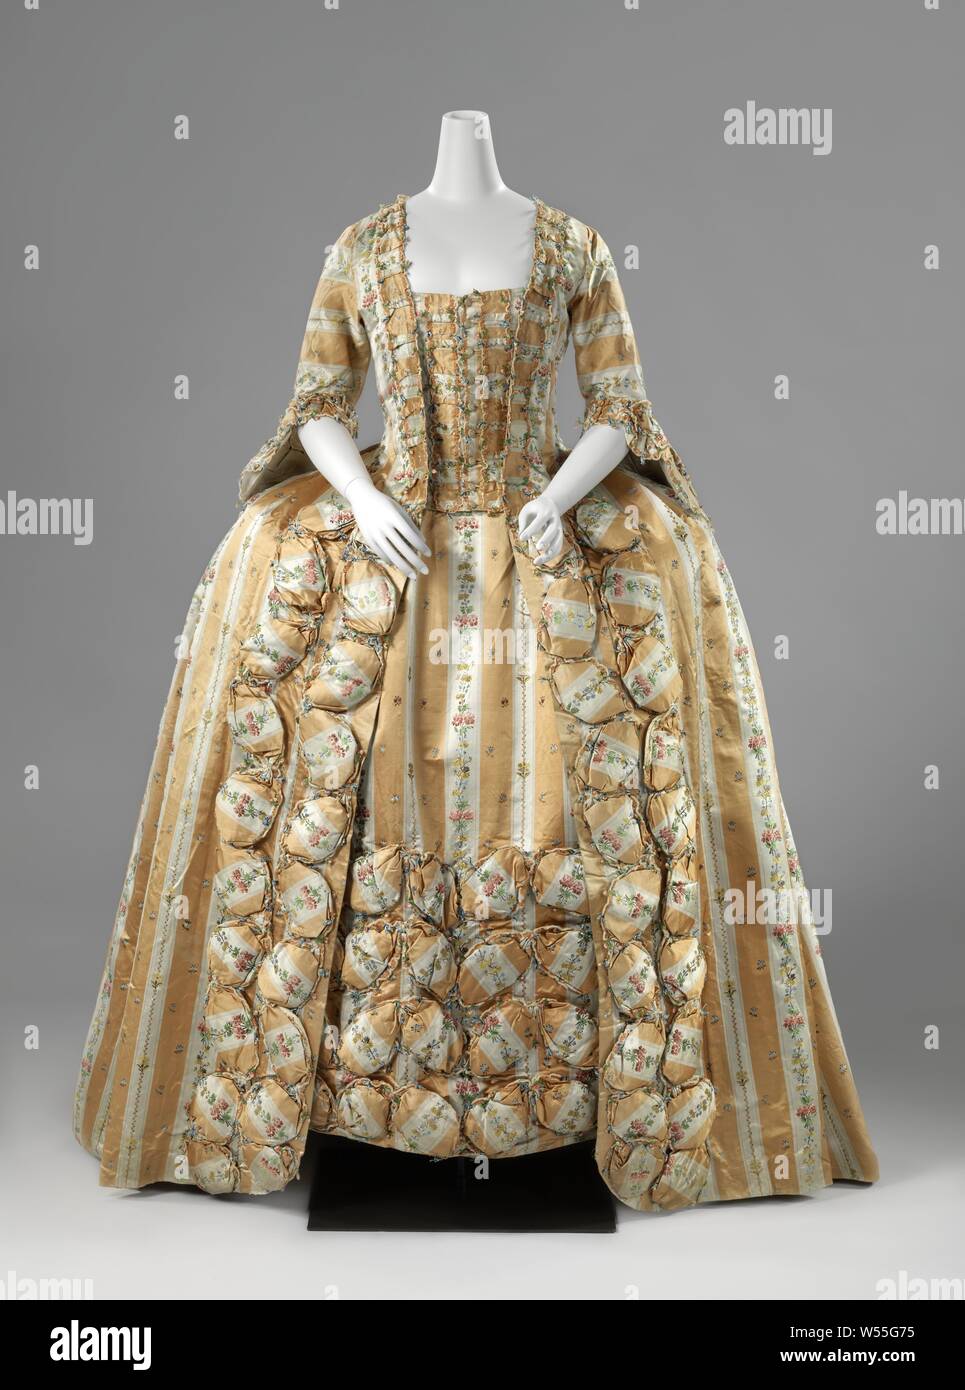 Sack-Back Gown with Skirt (robe à la française) Over frock with skirt or robe à la française, Frock or robe à la française consisting of a frock and matching skirt, silk with vertical yellow and white stripes and scatter motif multicolored bouquets, with oval pouffes and lined with a multicolored chiné à la branche. Model: The frock has a number of deep bell pleats on the back, half-length close-fitting sleeves with engagementantes, chest piece with button fastening at the center front. The skirt consists of full bands on the front, while the invisible parts of the skirt consist only half Stock Photo